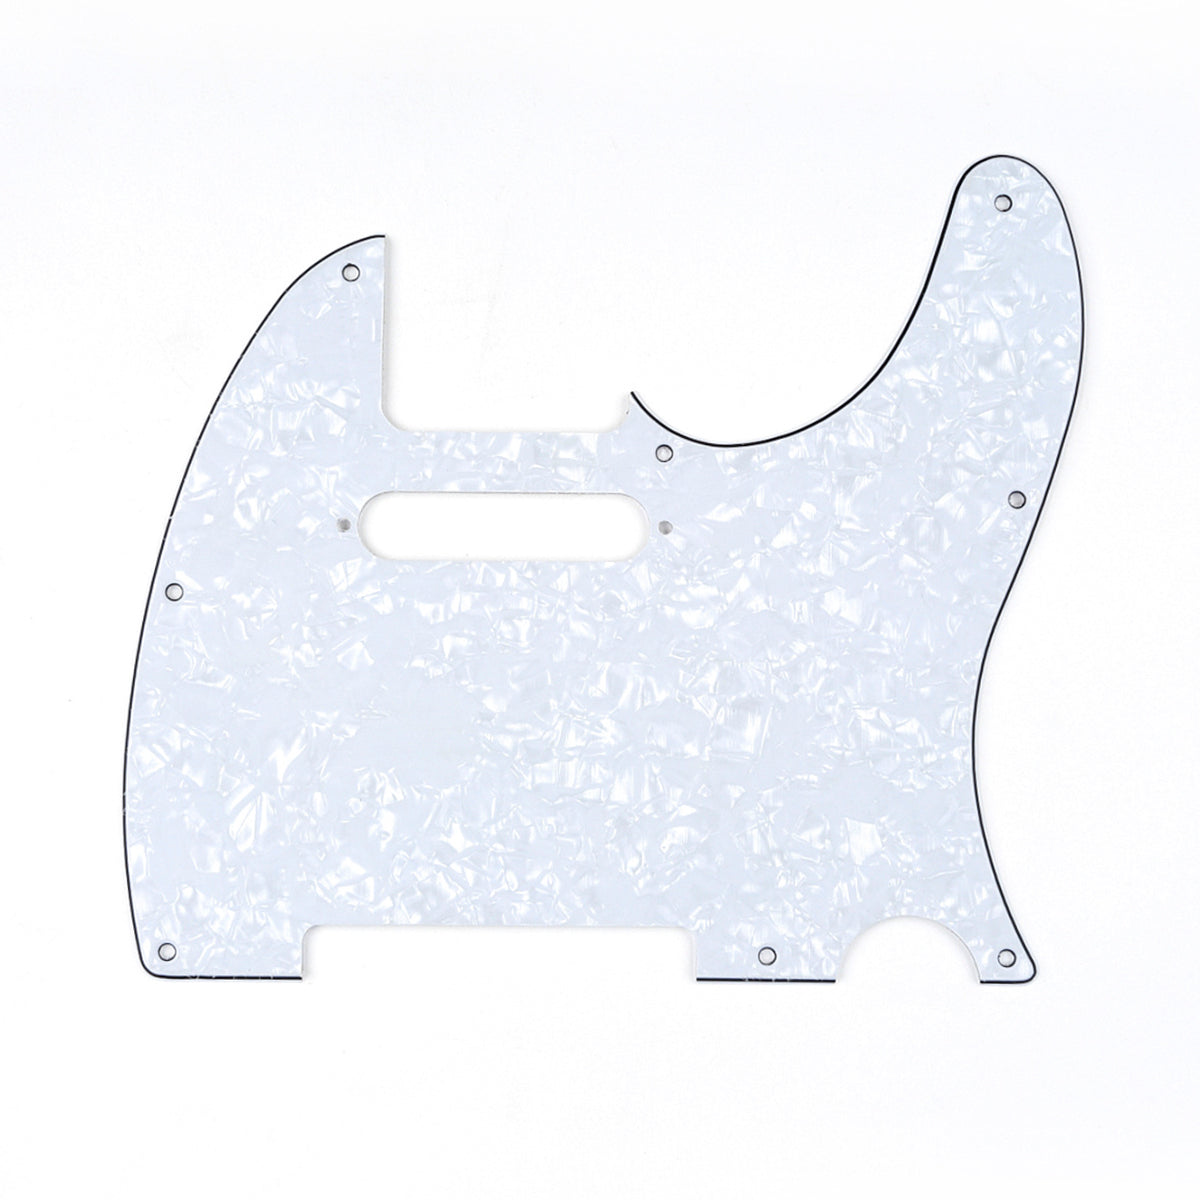 Musiclily 8 Hole Tele Guitar Pickguard for USA/Mexican Made Fender Standard Telecaster Modern Style , 4Ply White Pearl